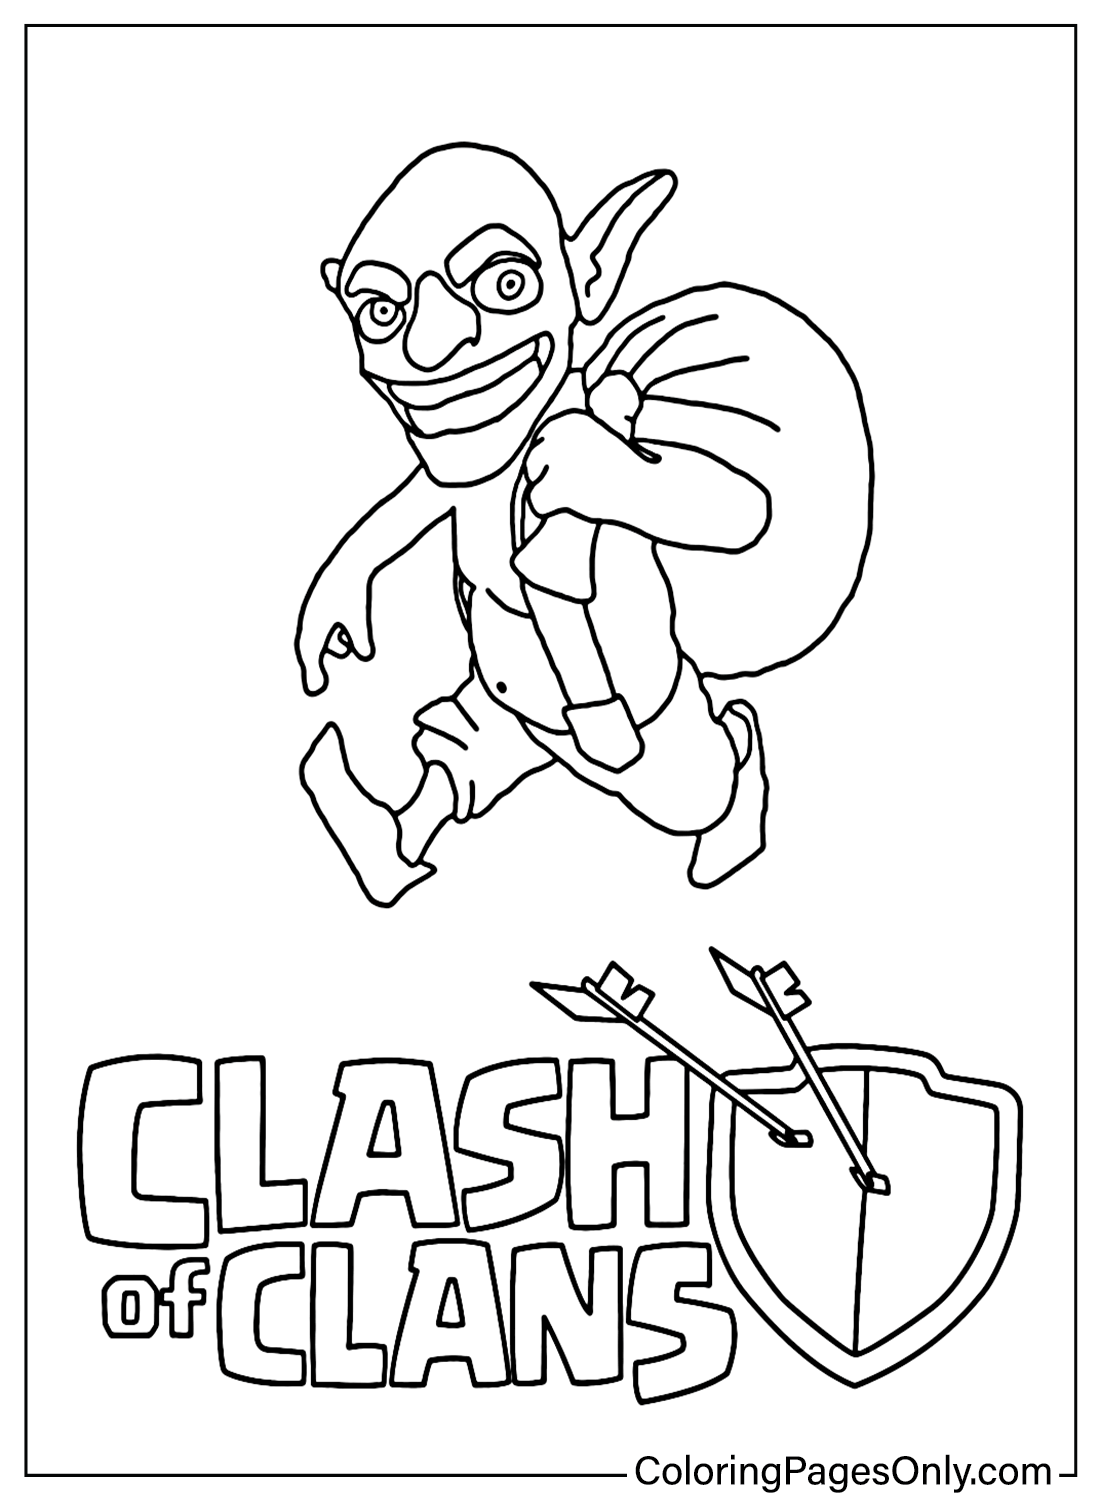 Clash of Clans Goblin Coloring Pages from Clash of Clans